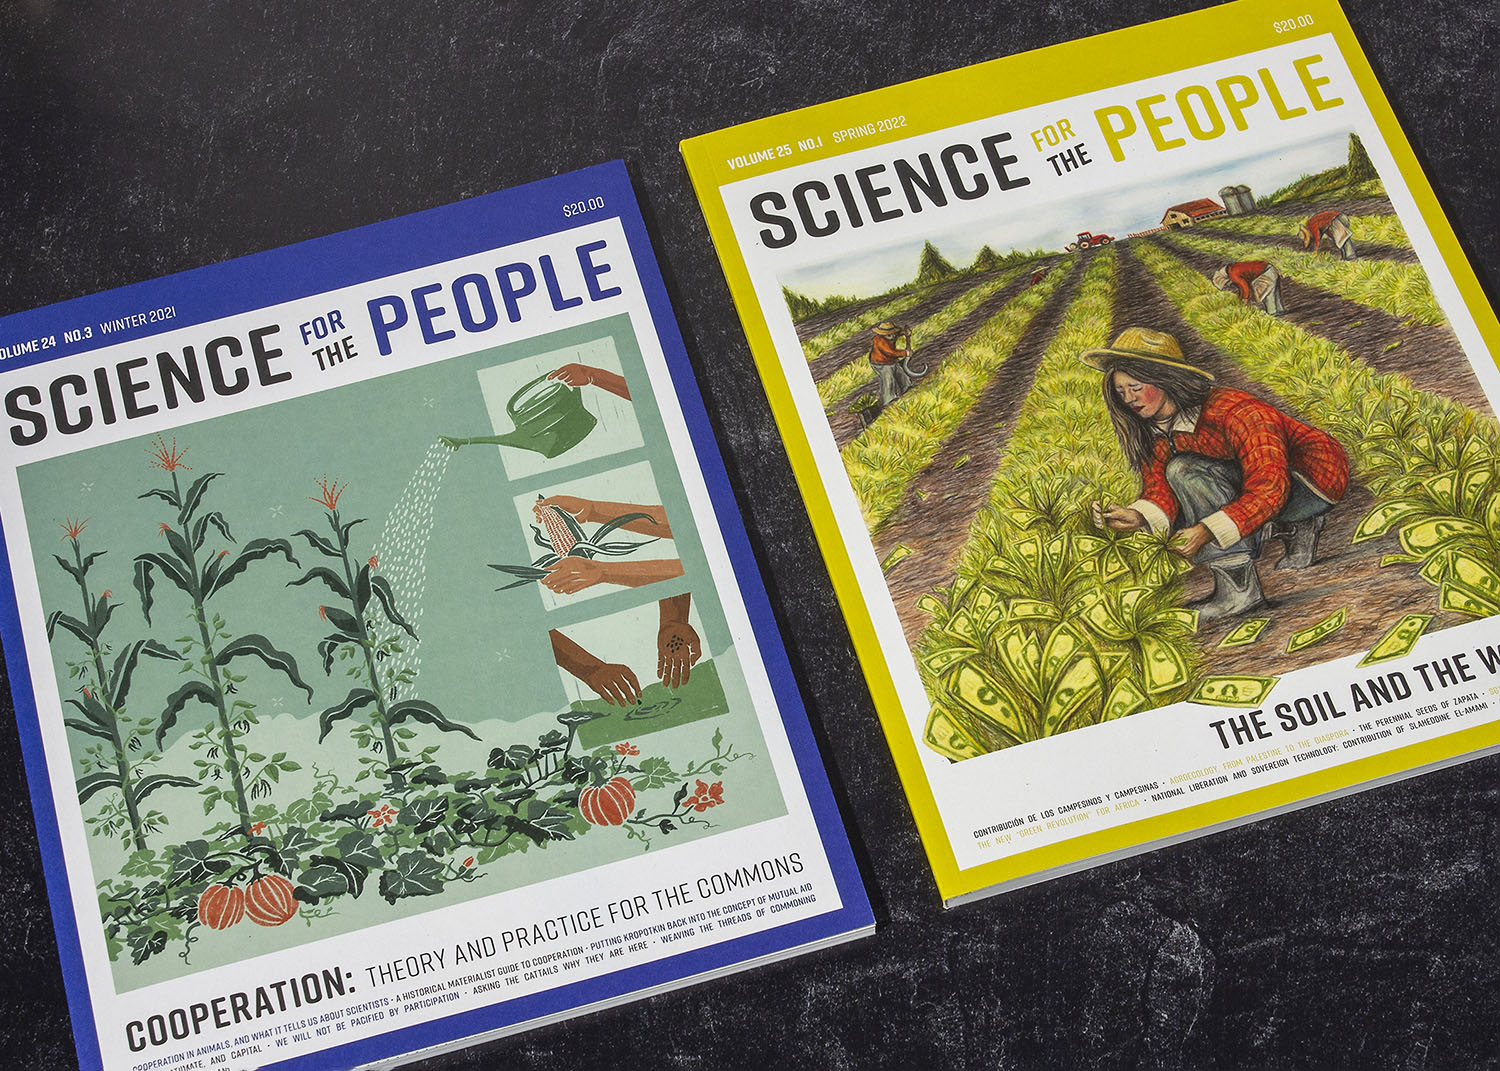 Copies of Science for the People Magazine